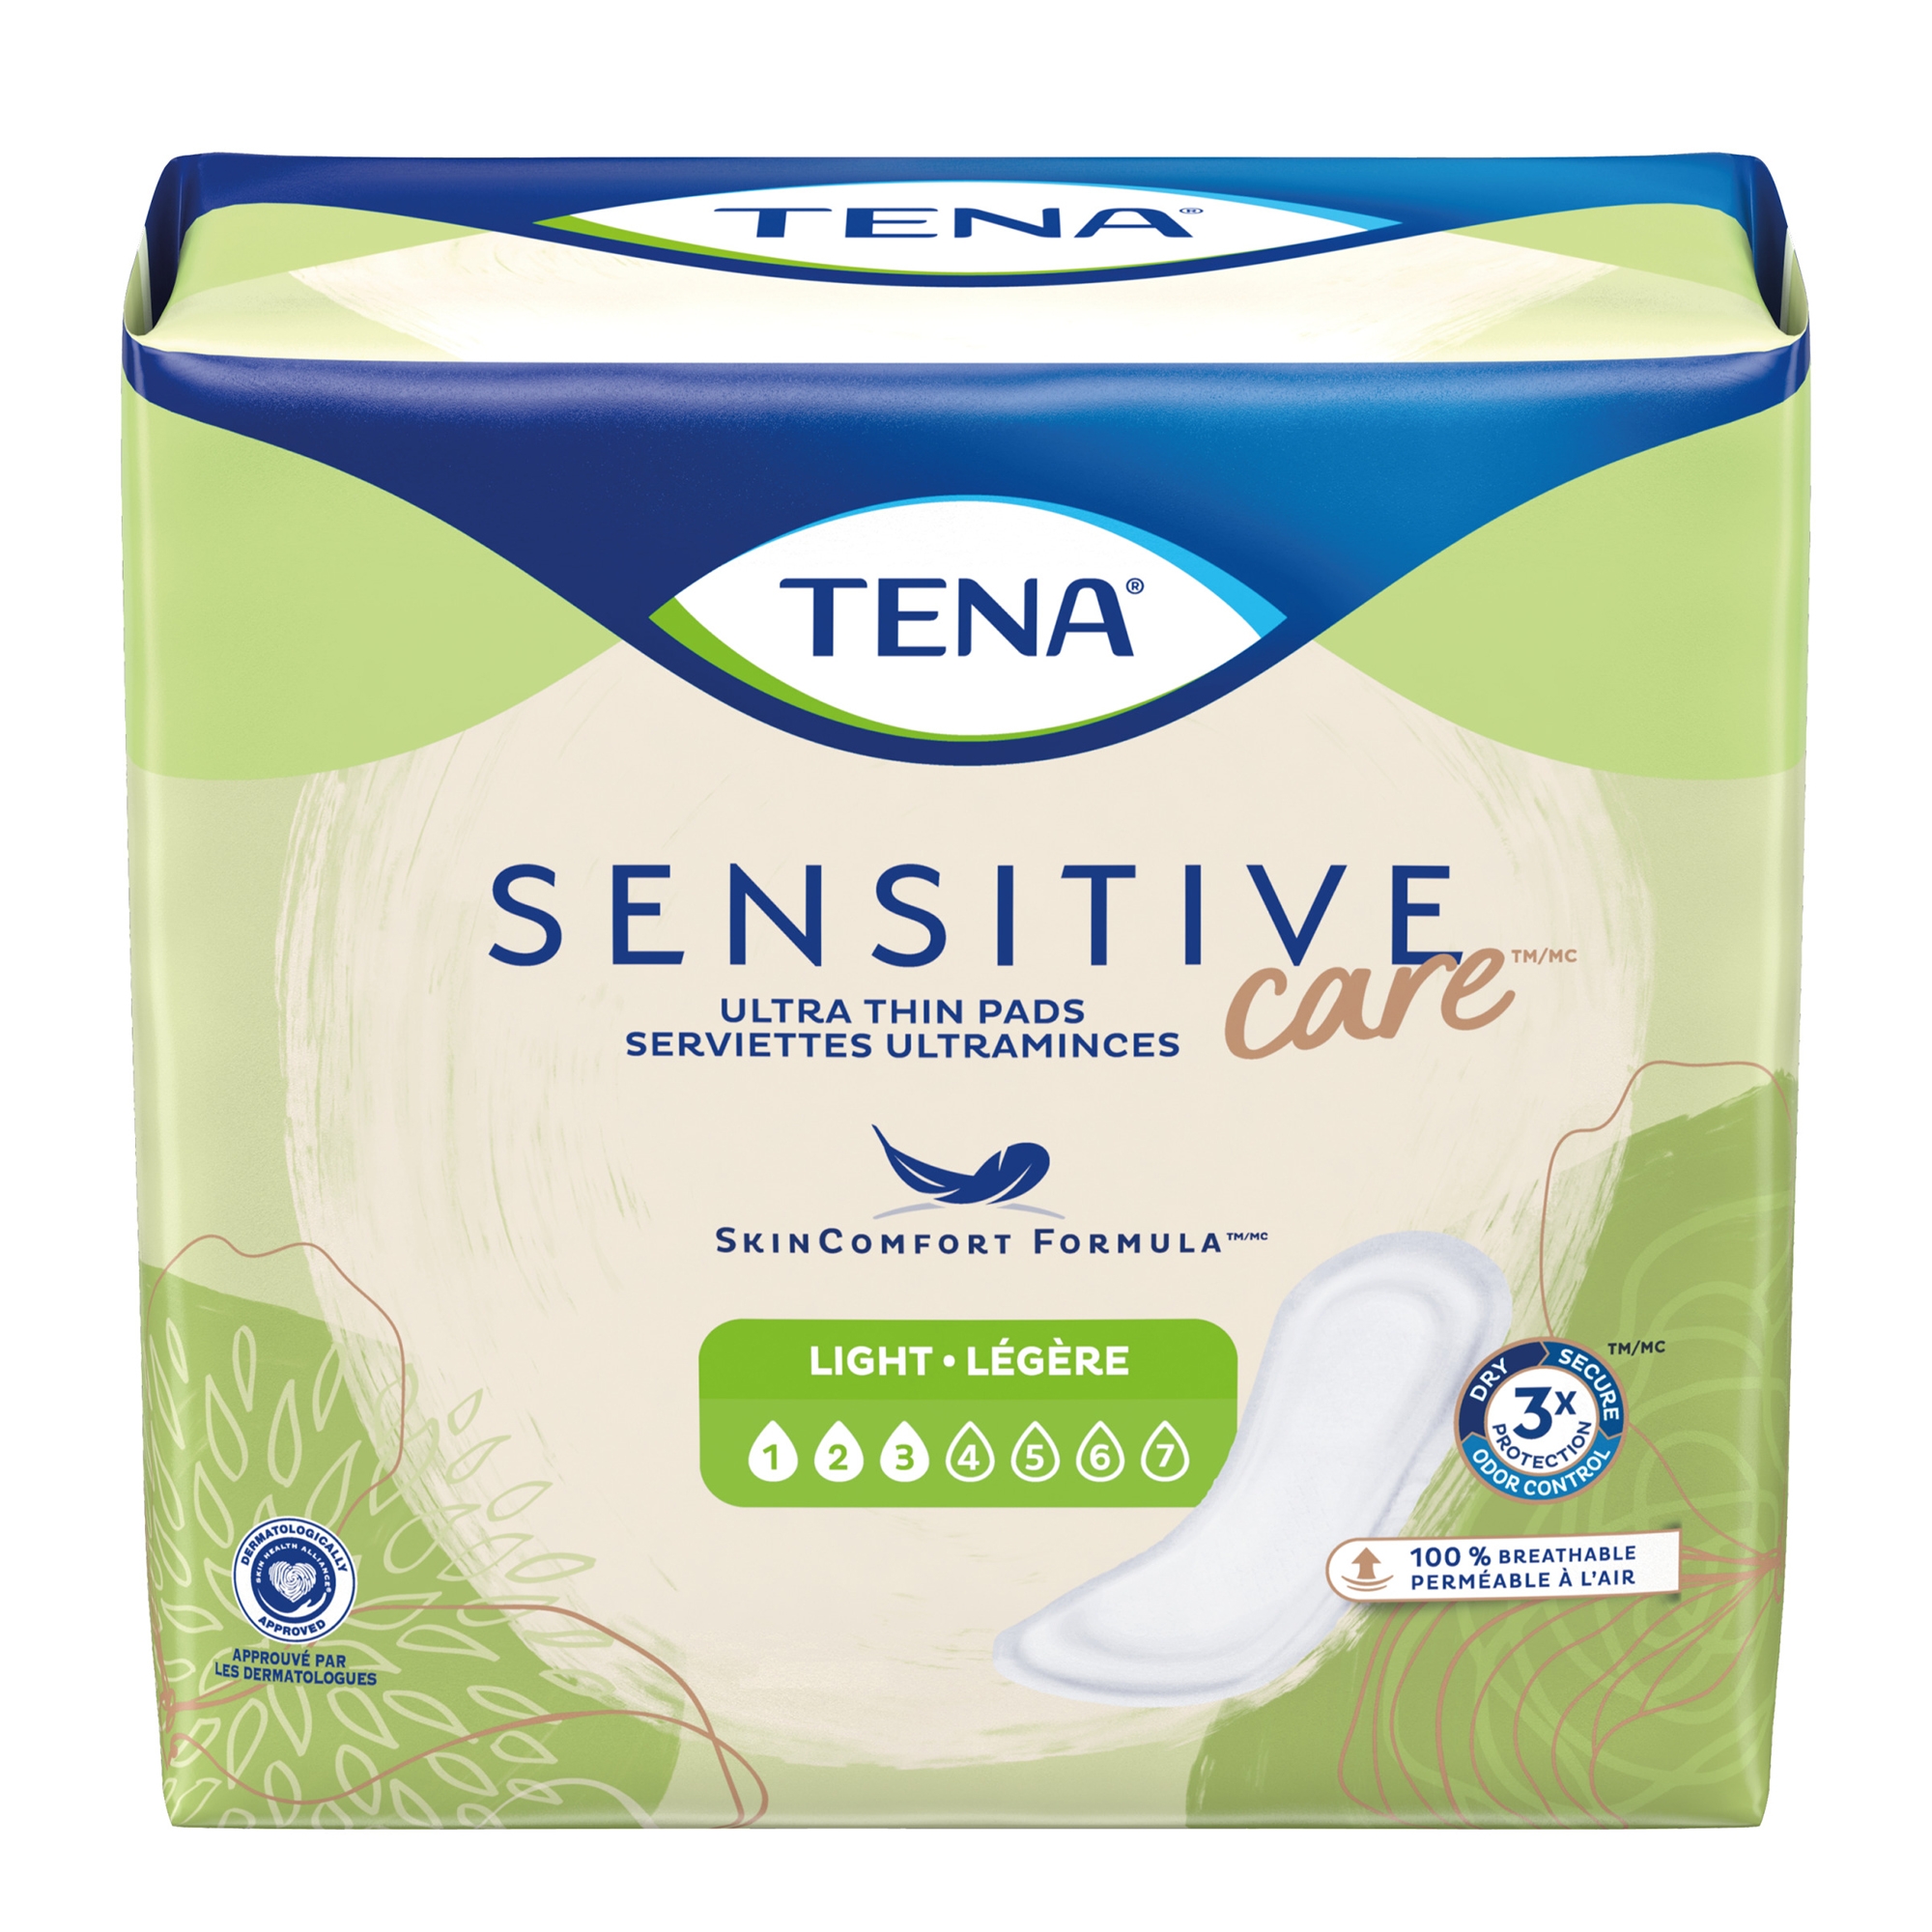  Tena For Men Level 2 Odour Control Incontinence Pads, 10 Pads  by Tena : Health & Household